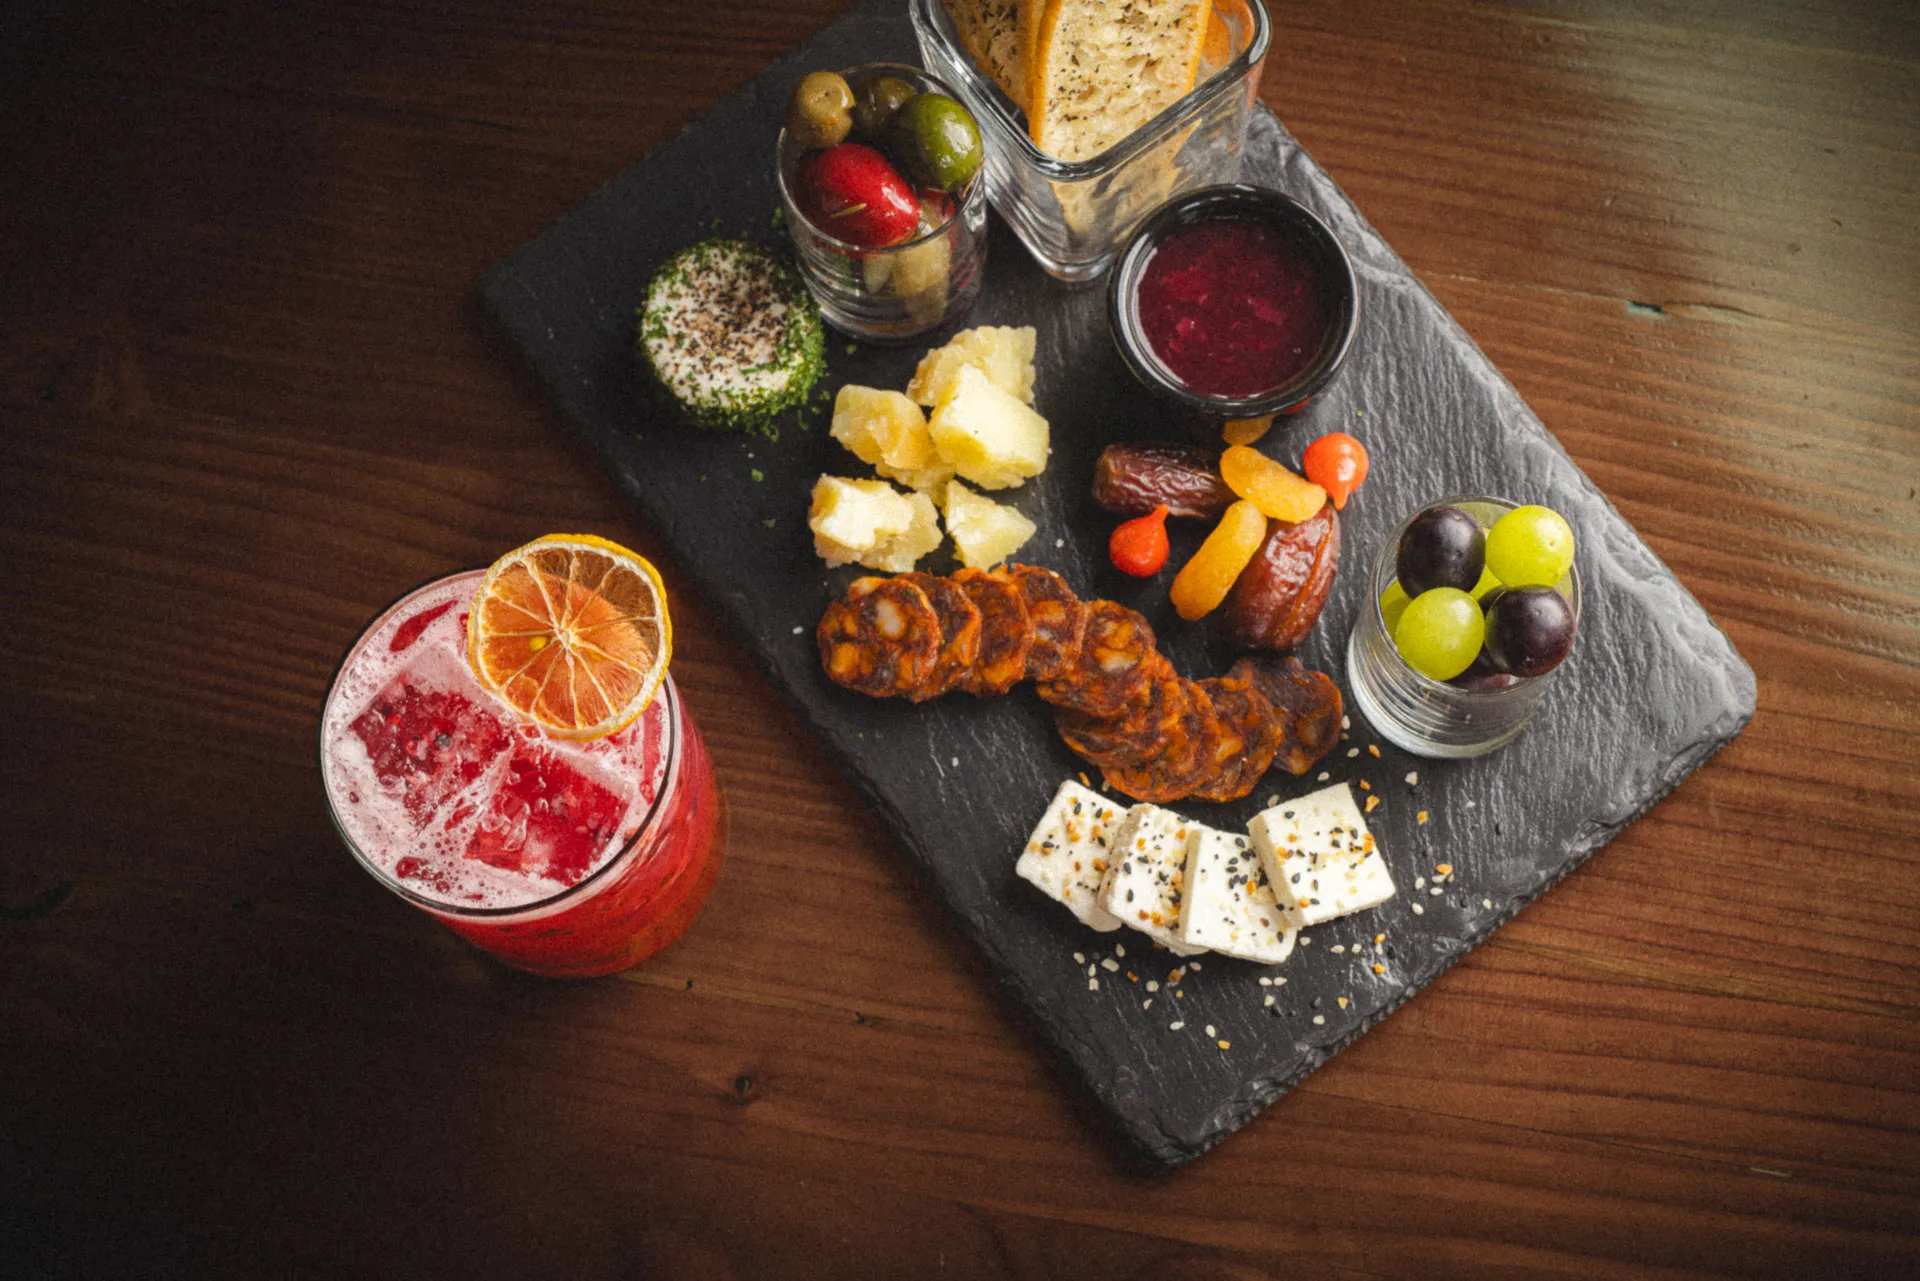 Overhead view of a gourmet charcuterie board featuring Everything Feta, Local Goat Cheese, Spanish Manchego, Cabernet Jam, Chef's Selection of Olives, Iberico Chorizo, and Crostini, complemented by a blackberry lemonade to the left.